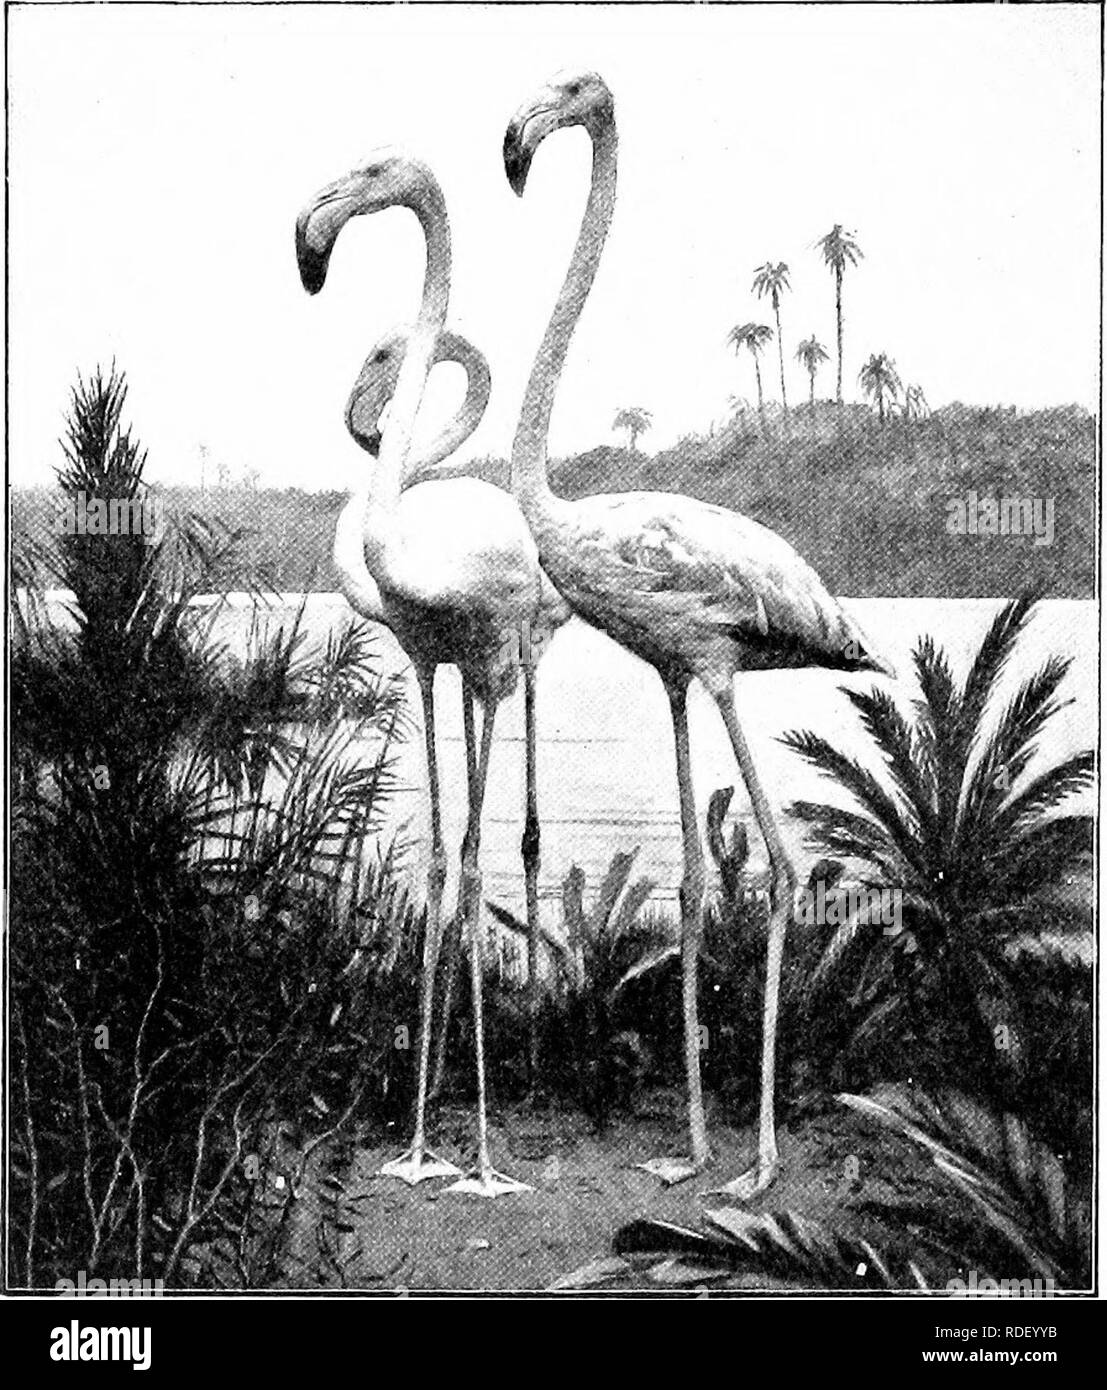 . The American natural history; a foundation of useful knowledge of the higher animals of North America. Natural history. CHAPTER XXVII THE ORDER OF FLAMINGOES—A CONNECTING LINK ODONTOGLOSSAE The long-legged, long-necked Flamingo is a very perfect connecting link between the wading-birds and the swimmers, and a most curiously formed bird. It has enormously long, stilt-like legs, like a heron; but its feet are fully webbed, like the feet of a duck. Its standing height is from 48 to 54 inches. It has a long, slender, crane-like neck; but its thick, broken-. New York Zoological Park THE FLAMINGO. Stock Photo